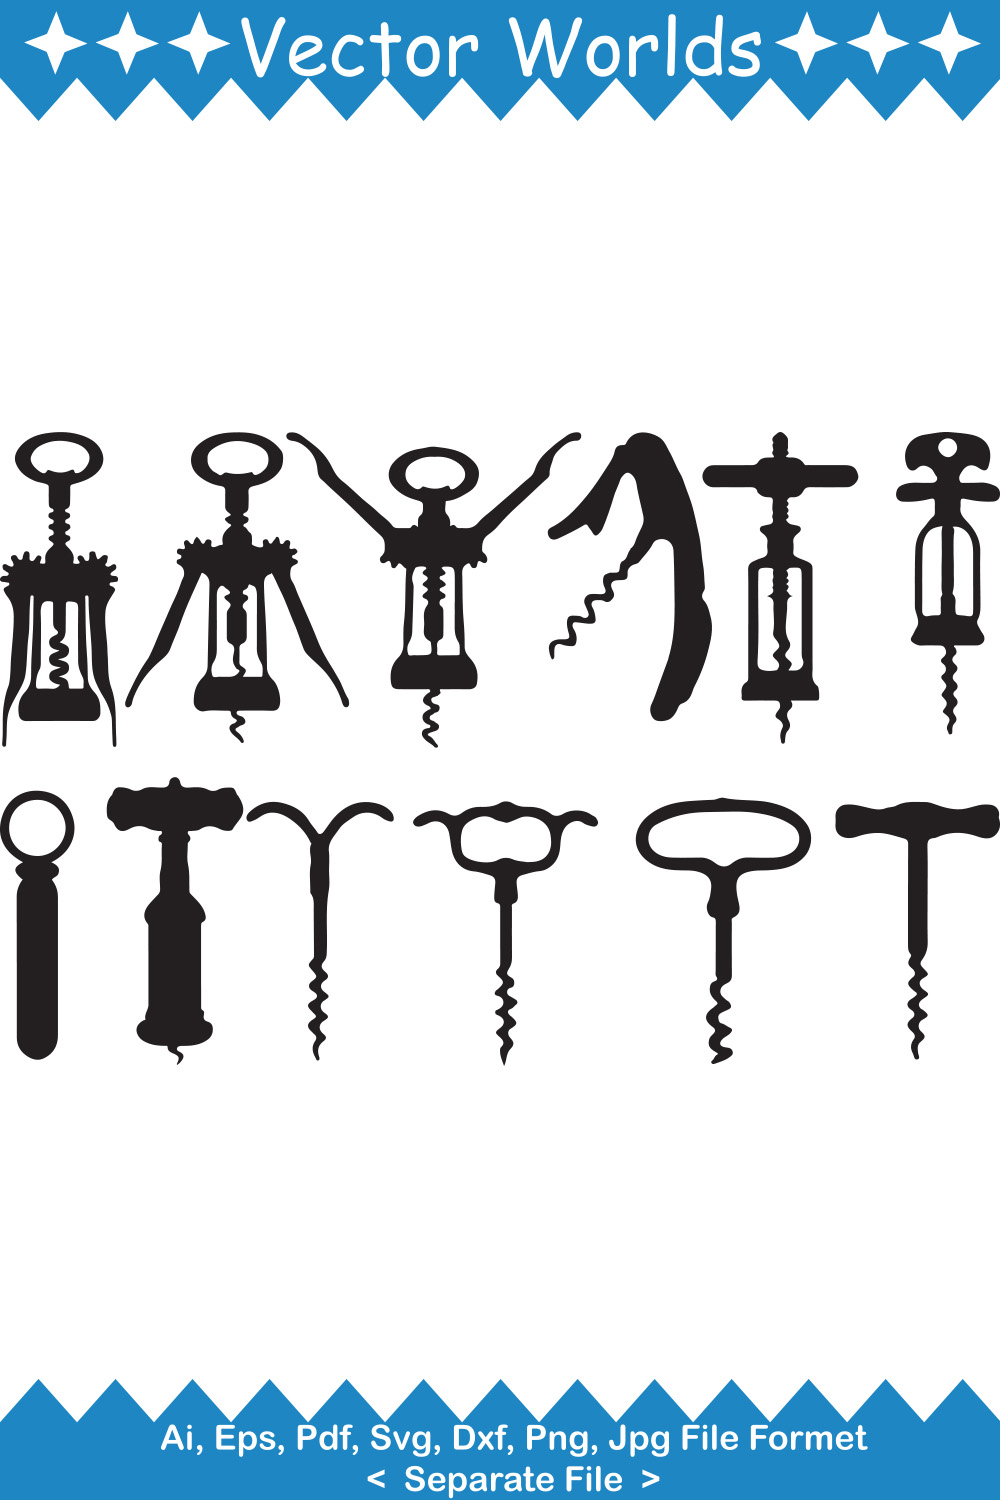 A selection of irresistible vector images of corkscrew silhouettes